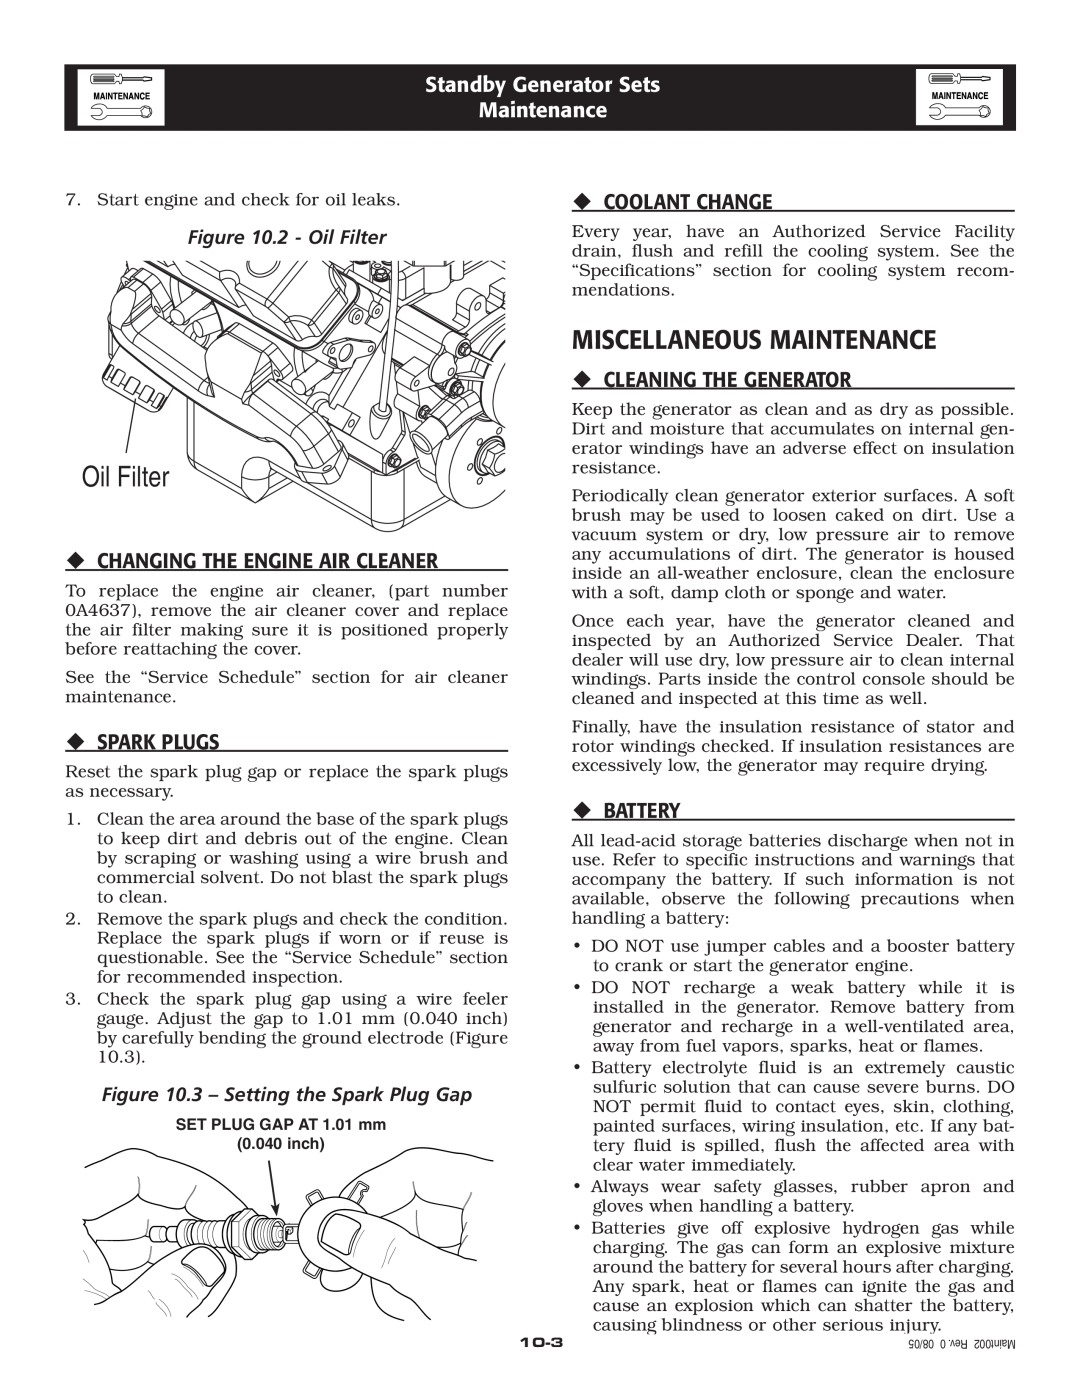 Generac Power Systems 005223-0 Miscellaneous Maintenance, ‹ Changing The Engine Air Cleaner, ‹ Spark Plugs, ‹ Battery 